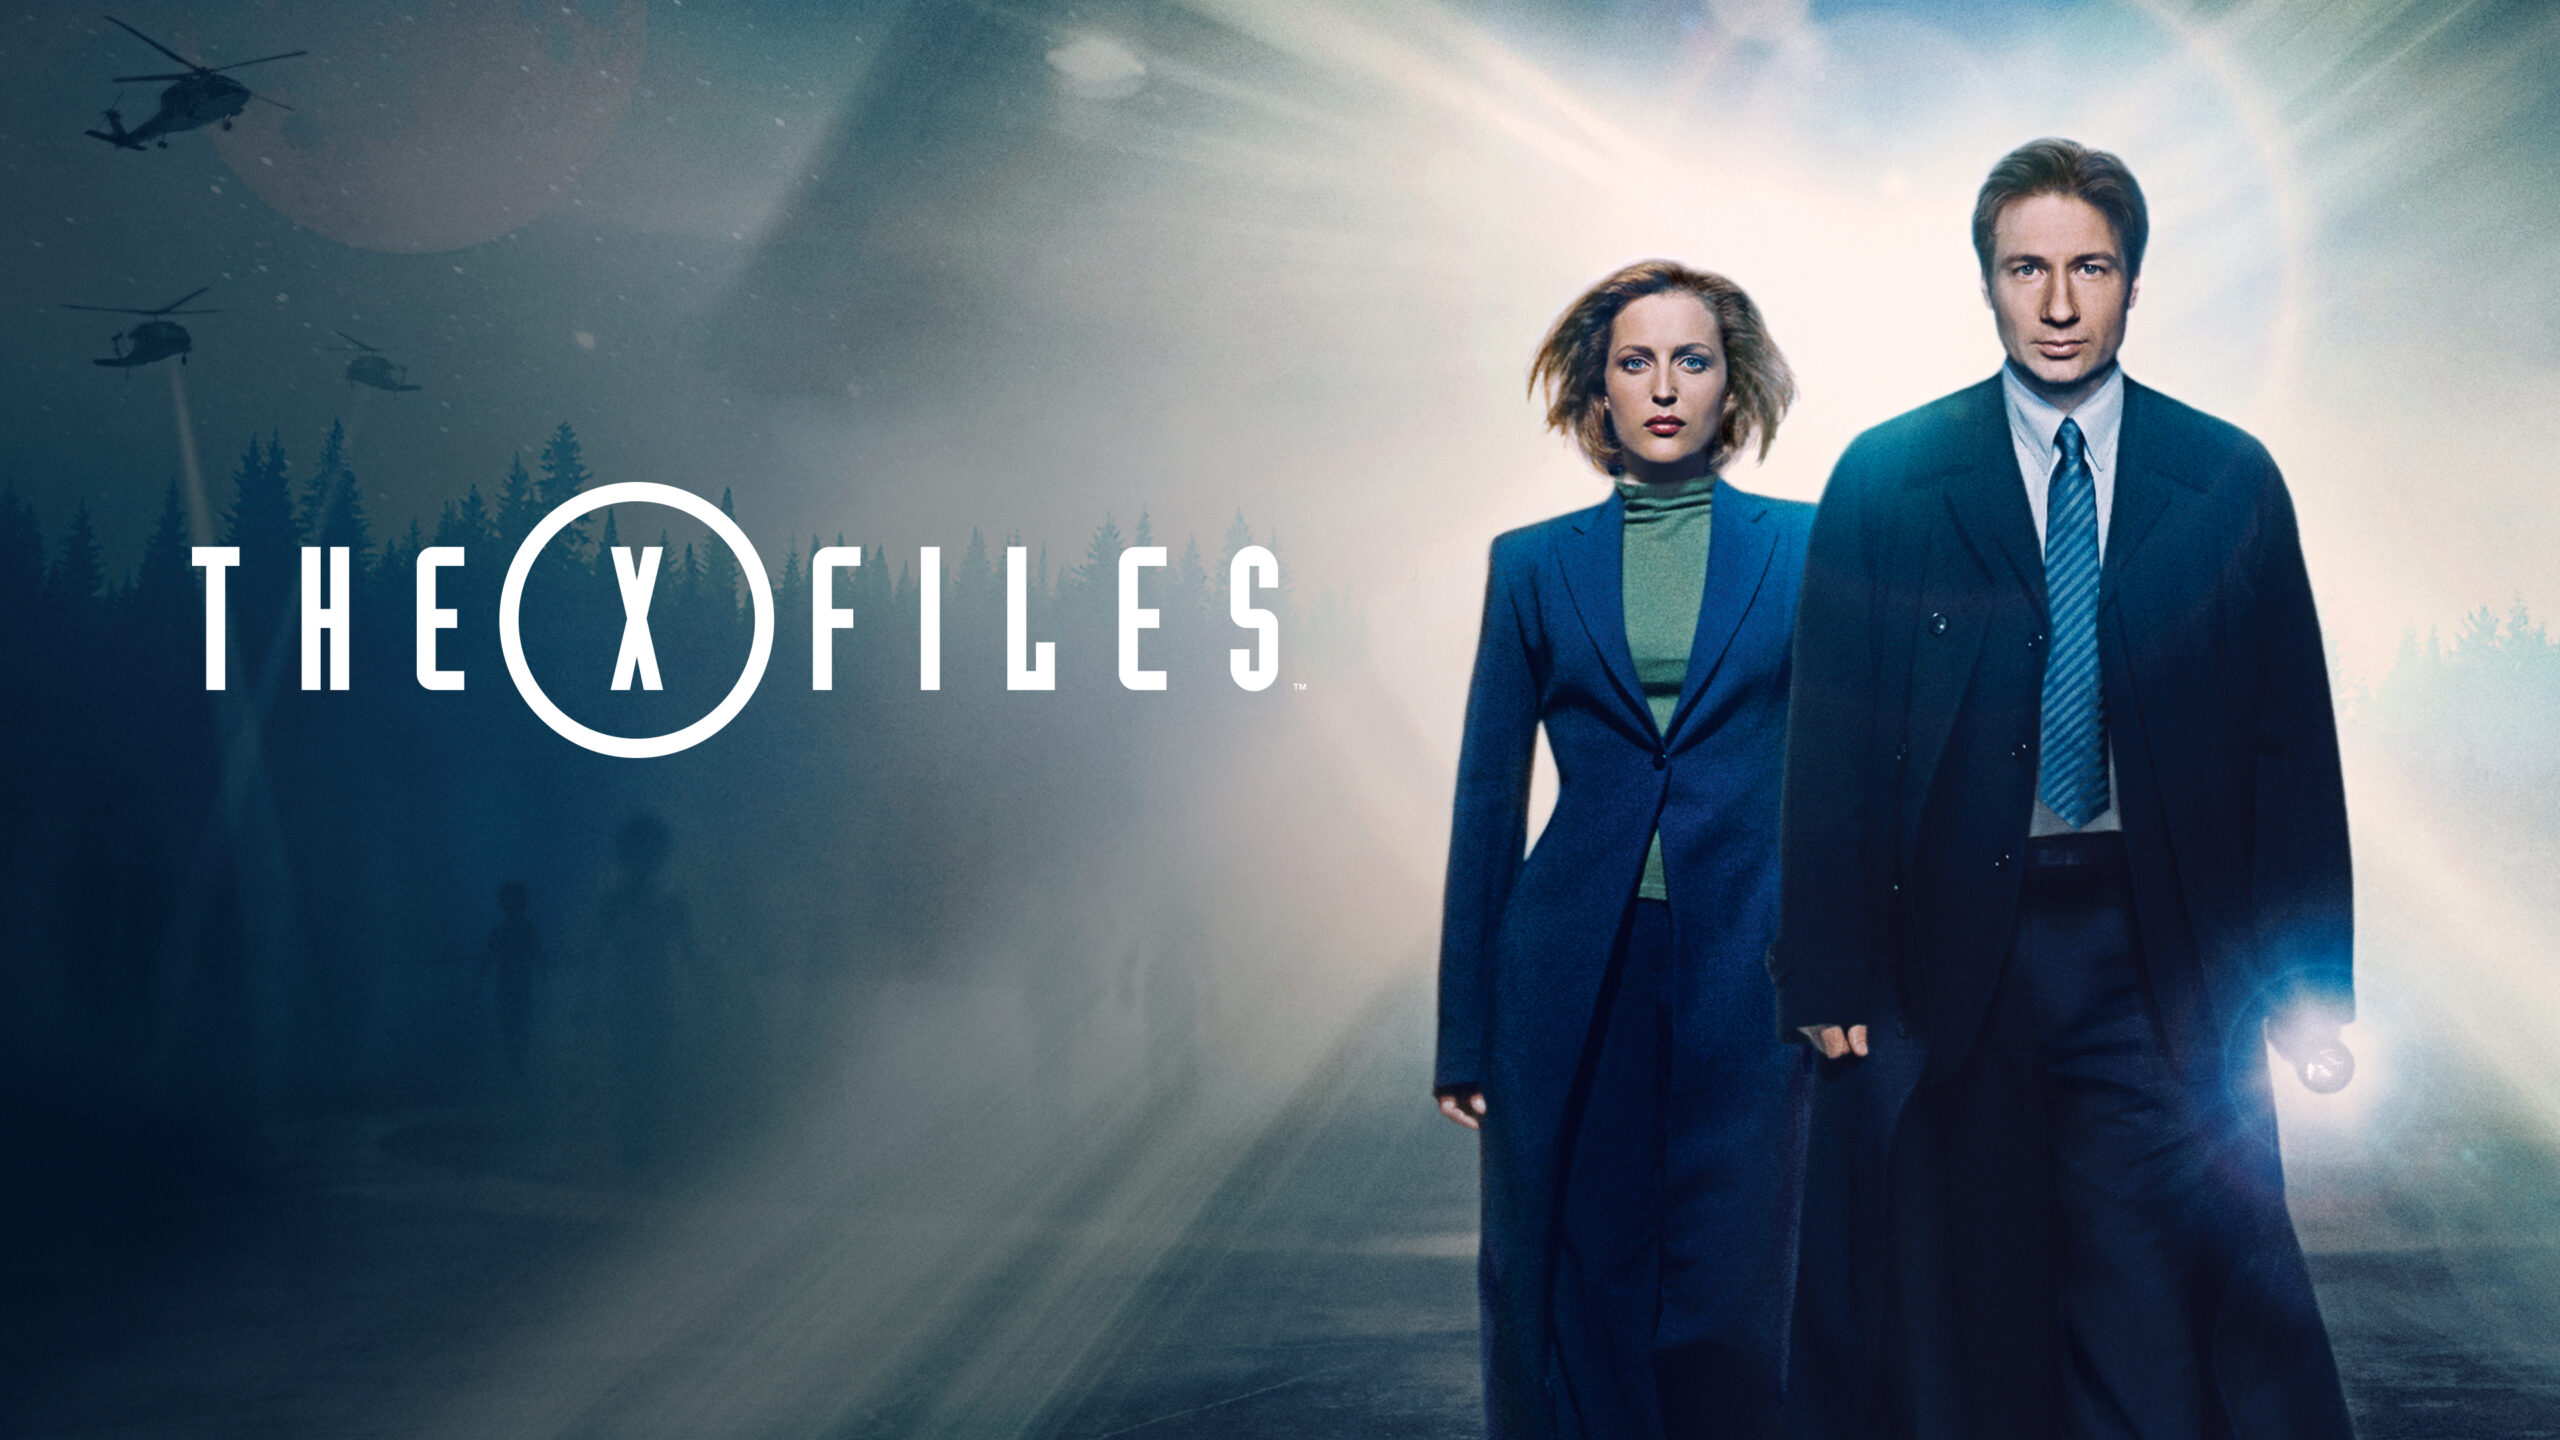 Stream “The X-Files” Now on Sunset: A Sci-Fi Classic Returns